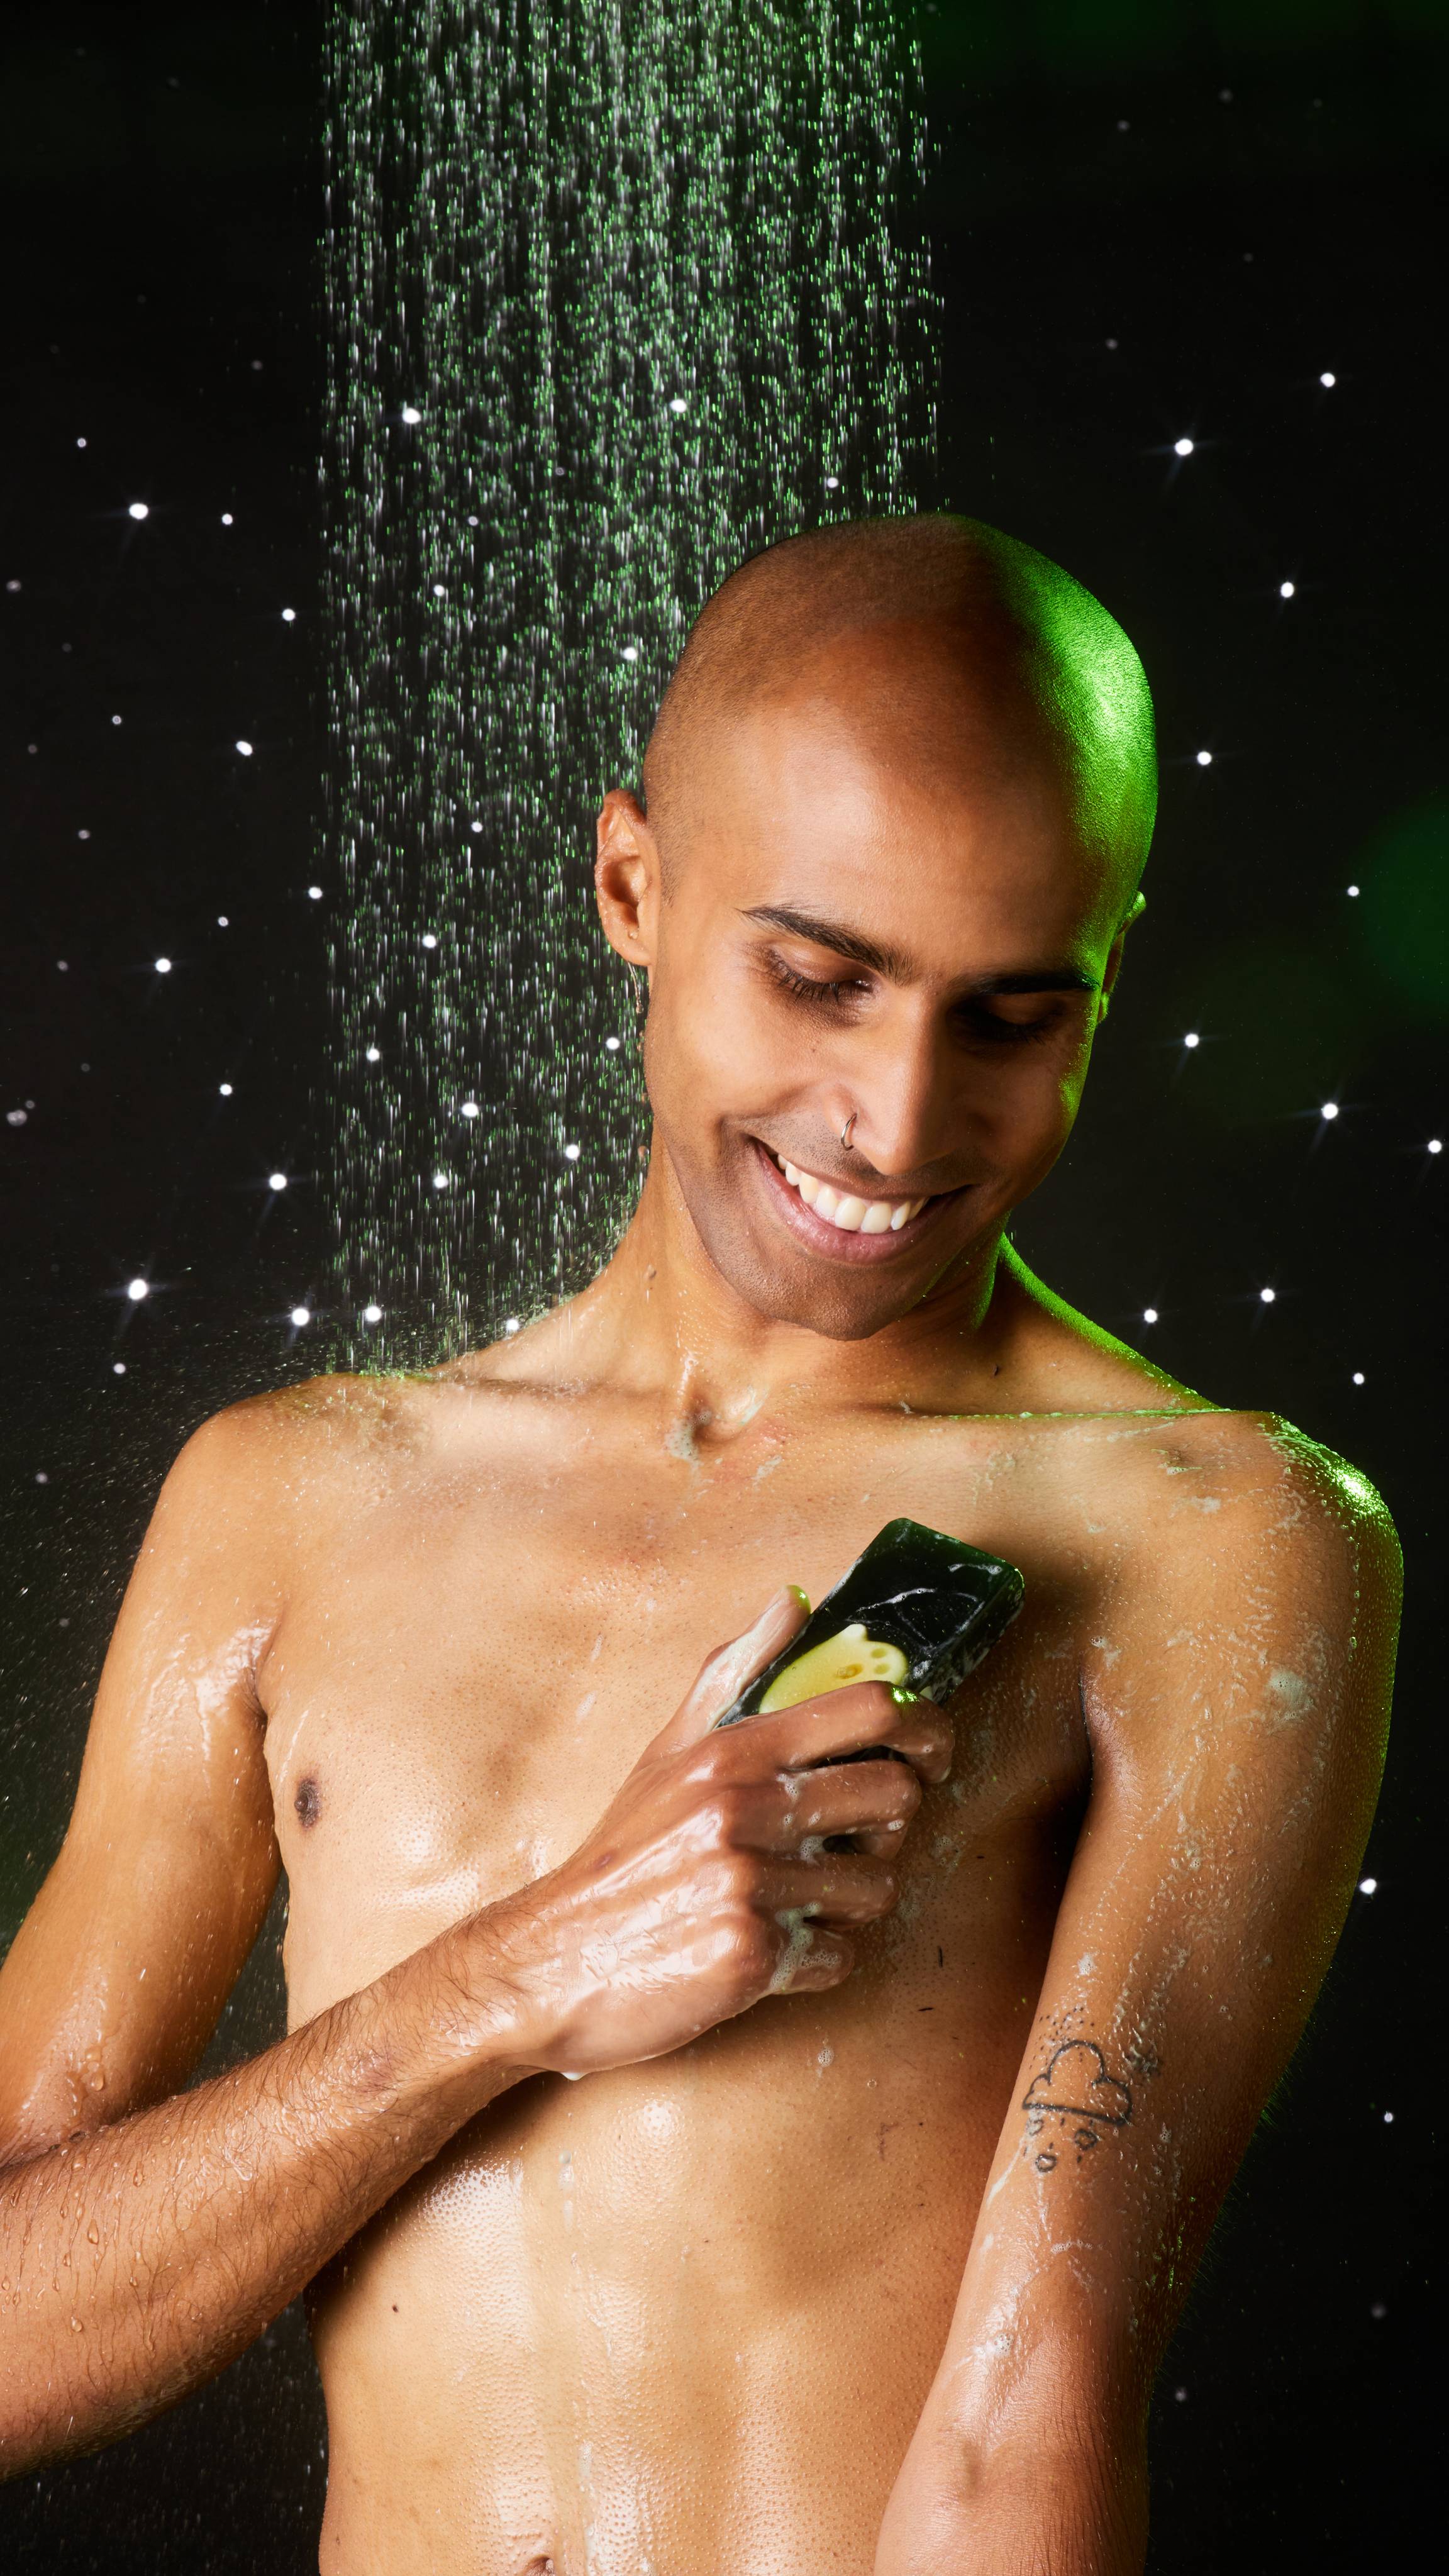 Model stands under running shower on a twinkly background as the lather up the Demon in the Dark soap over their torso.